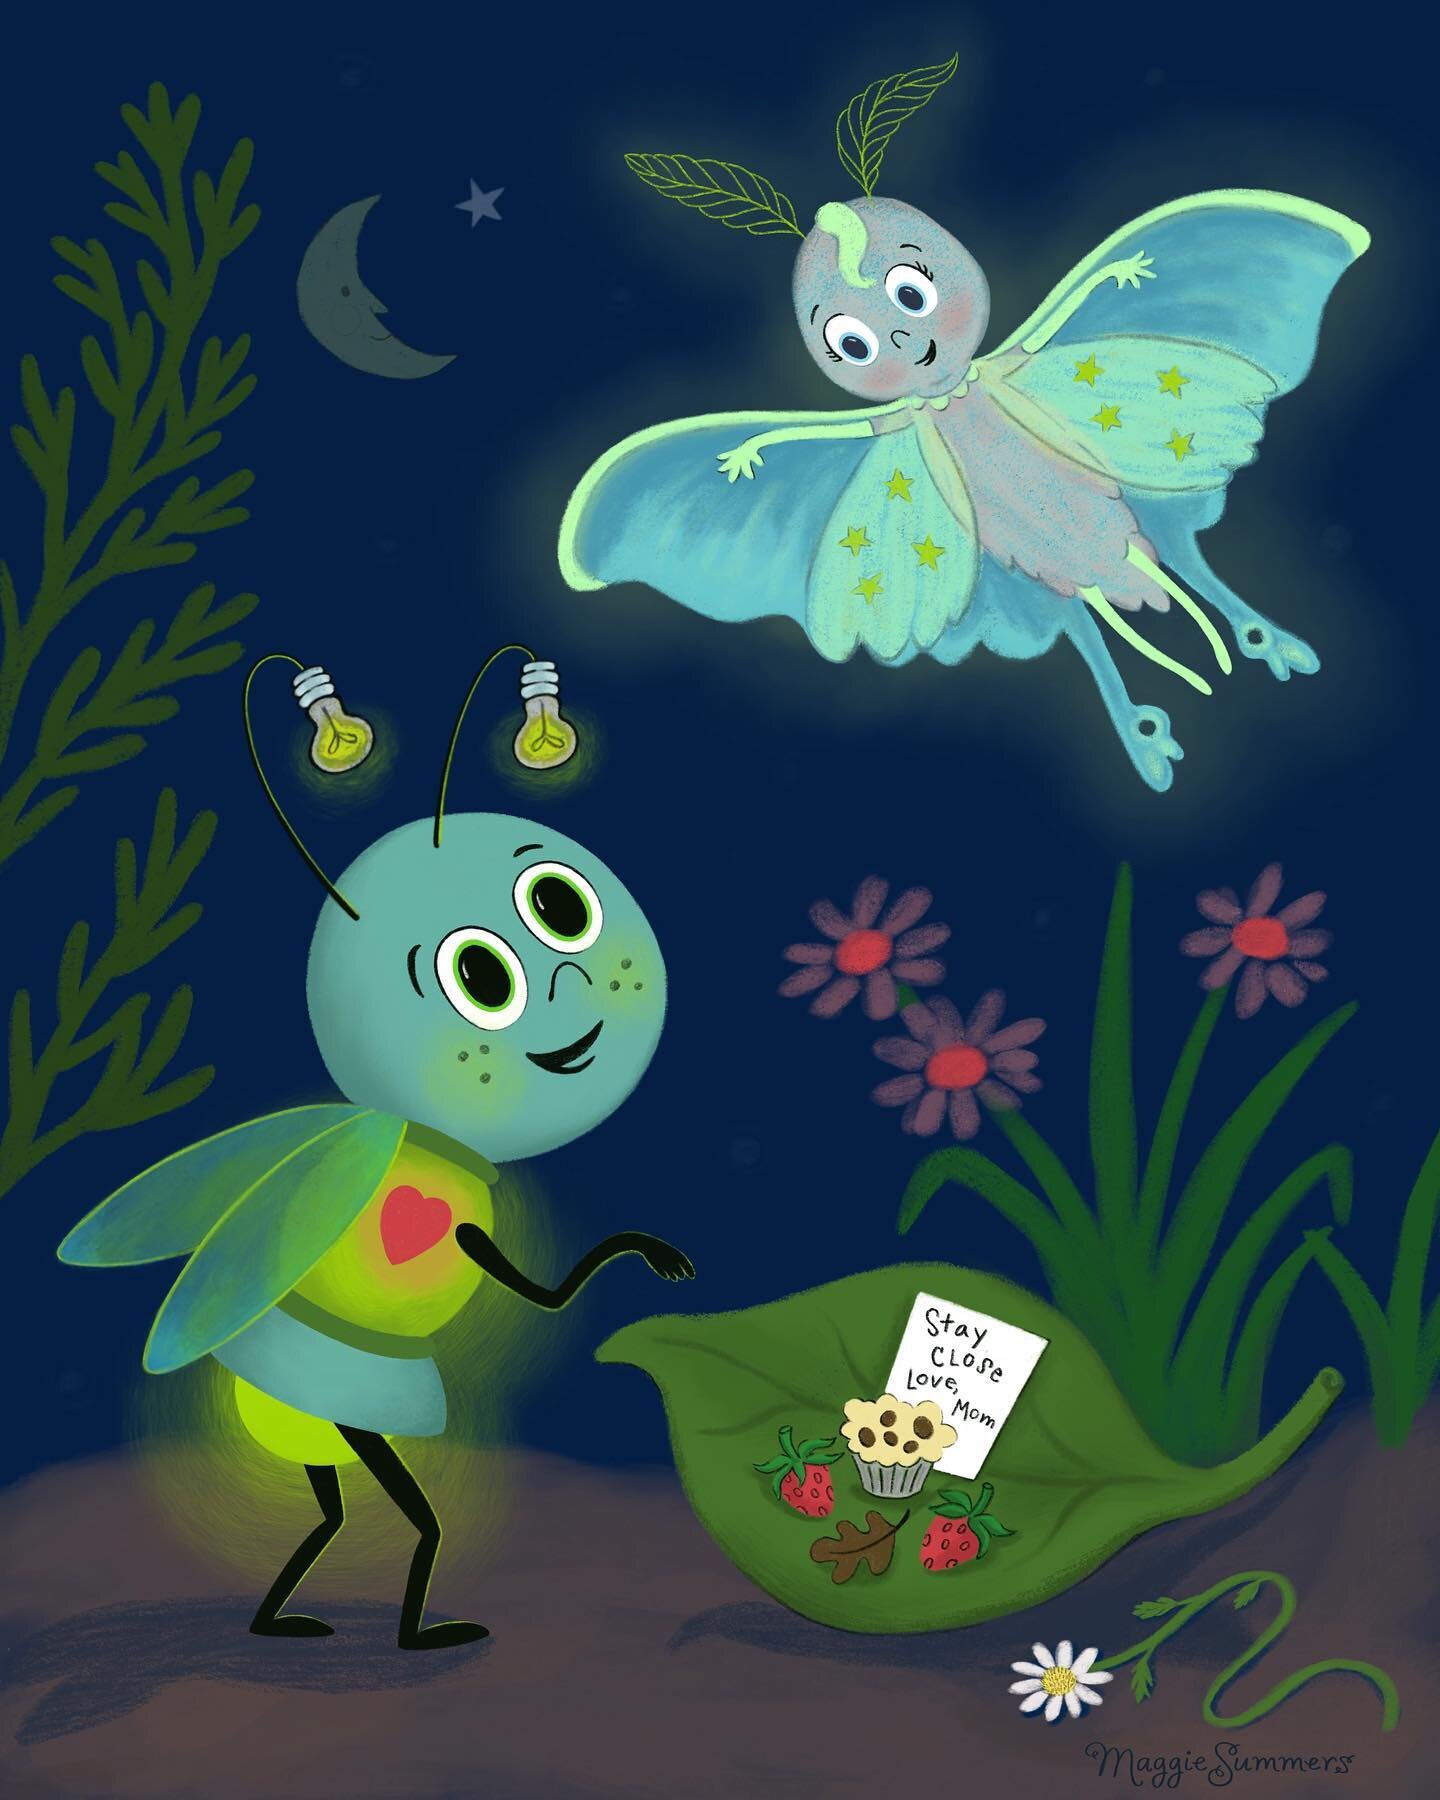 My final for week one of the @makeartthatsells Illustrating Children&rsquo;s Book course with delightful story written by @zoe_tucker_design. I&rsquo;m having a wonderful time exploring characters Lampy the firefly and Luna the moth, who love to take